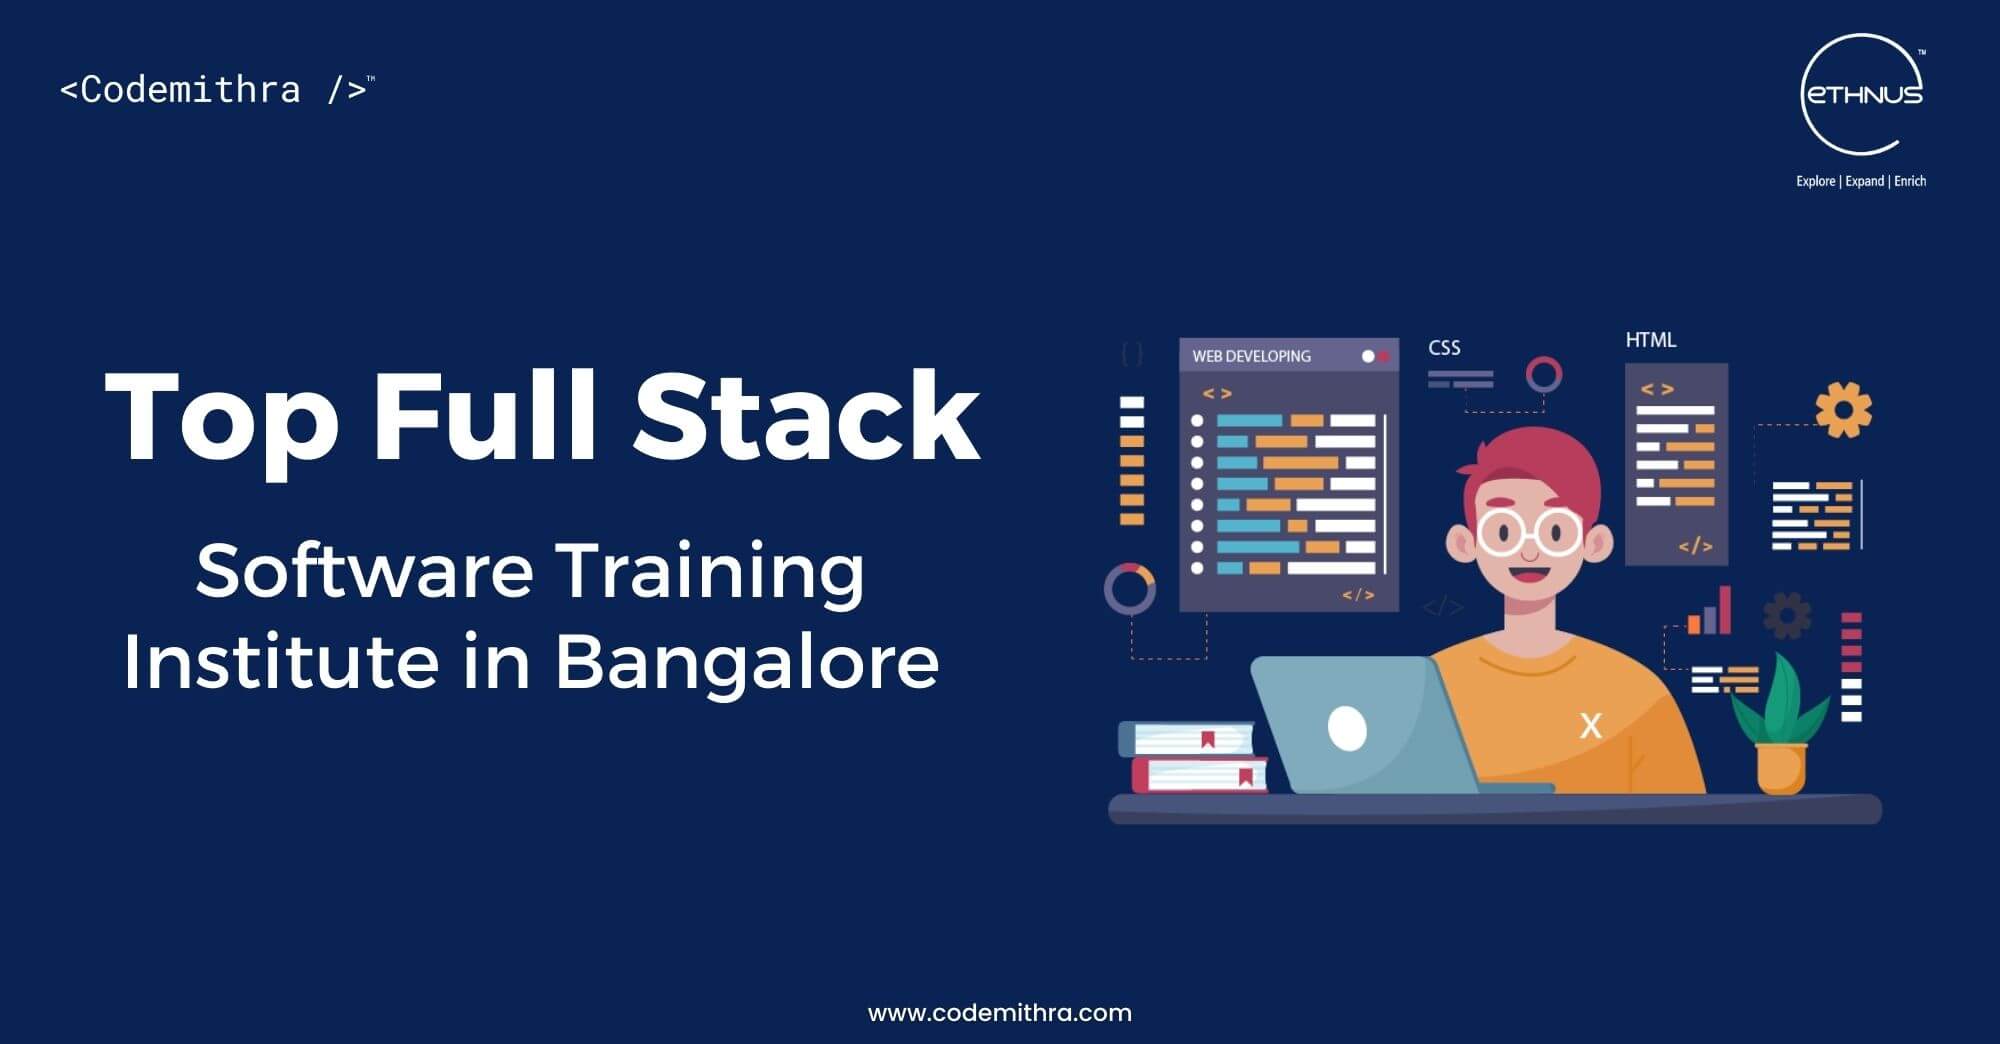 Top Full Stack Software Training Institute in Bangalore